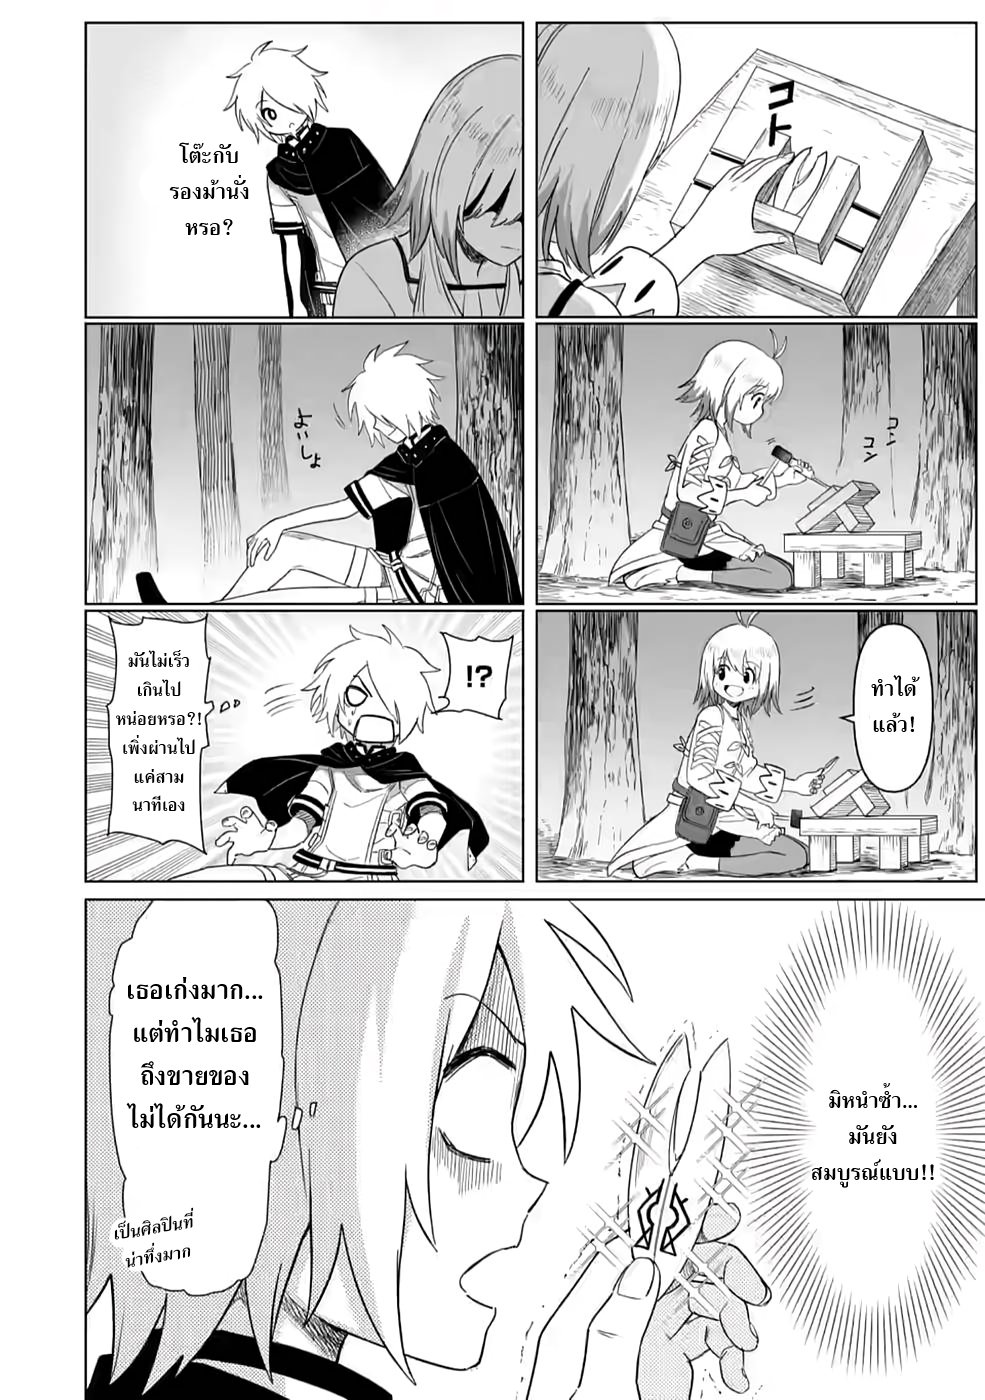 The Strongest Sage Without a Job 6 (7)